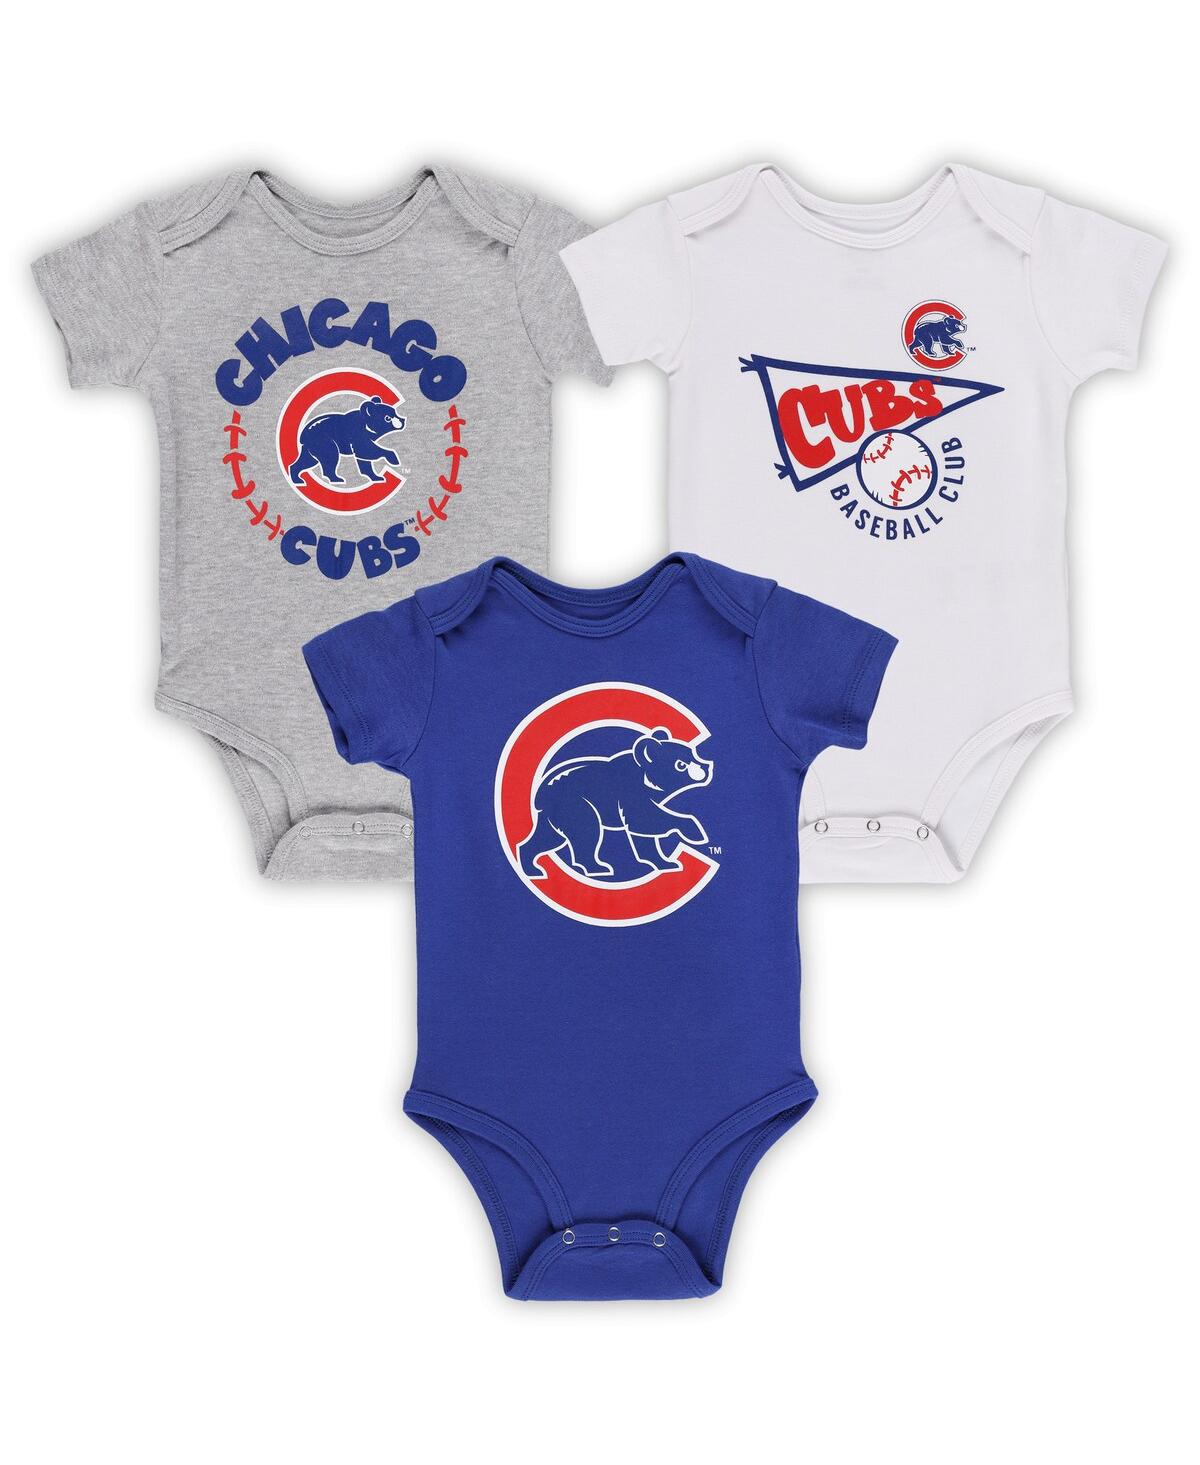 OUTERSTUFF INFANT BOYS AND GIRLS ROYAL, WHITE, HEATHER GRAY CHICAGO CUBS BIGGEST LITTLE FAN 3-PACK BODYSUIT SET